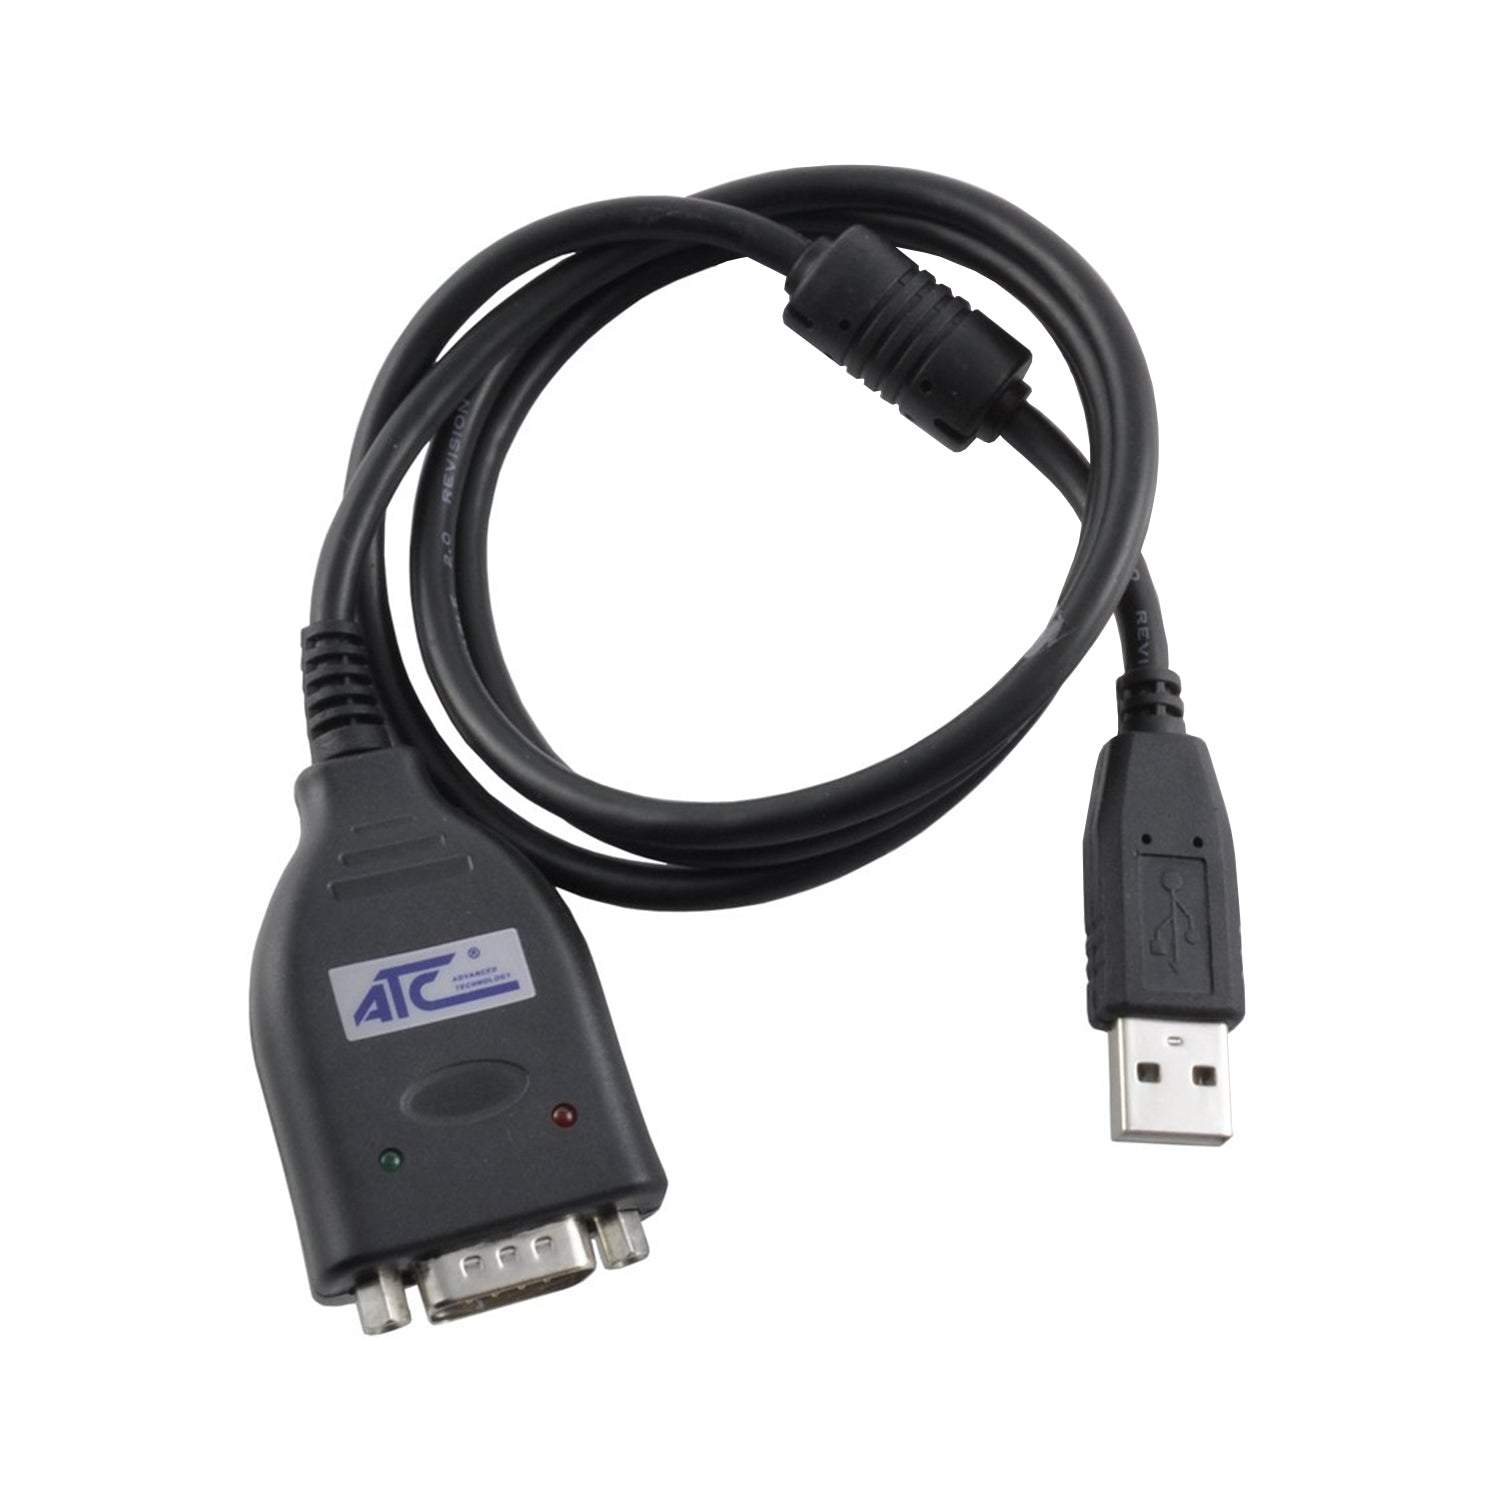 to USB Adapter - – Connect